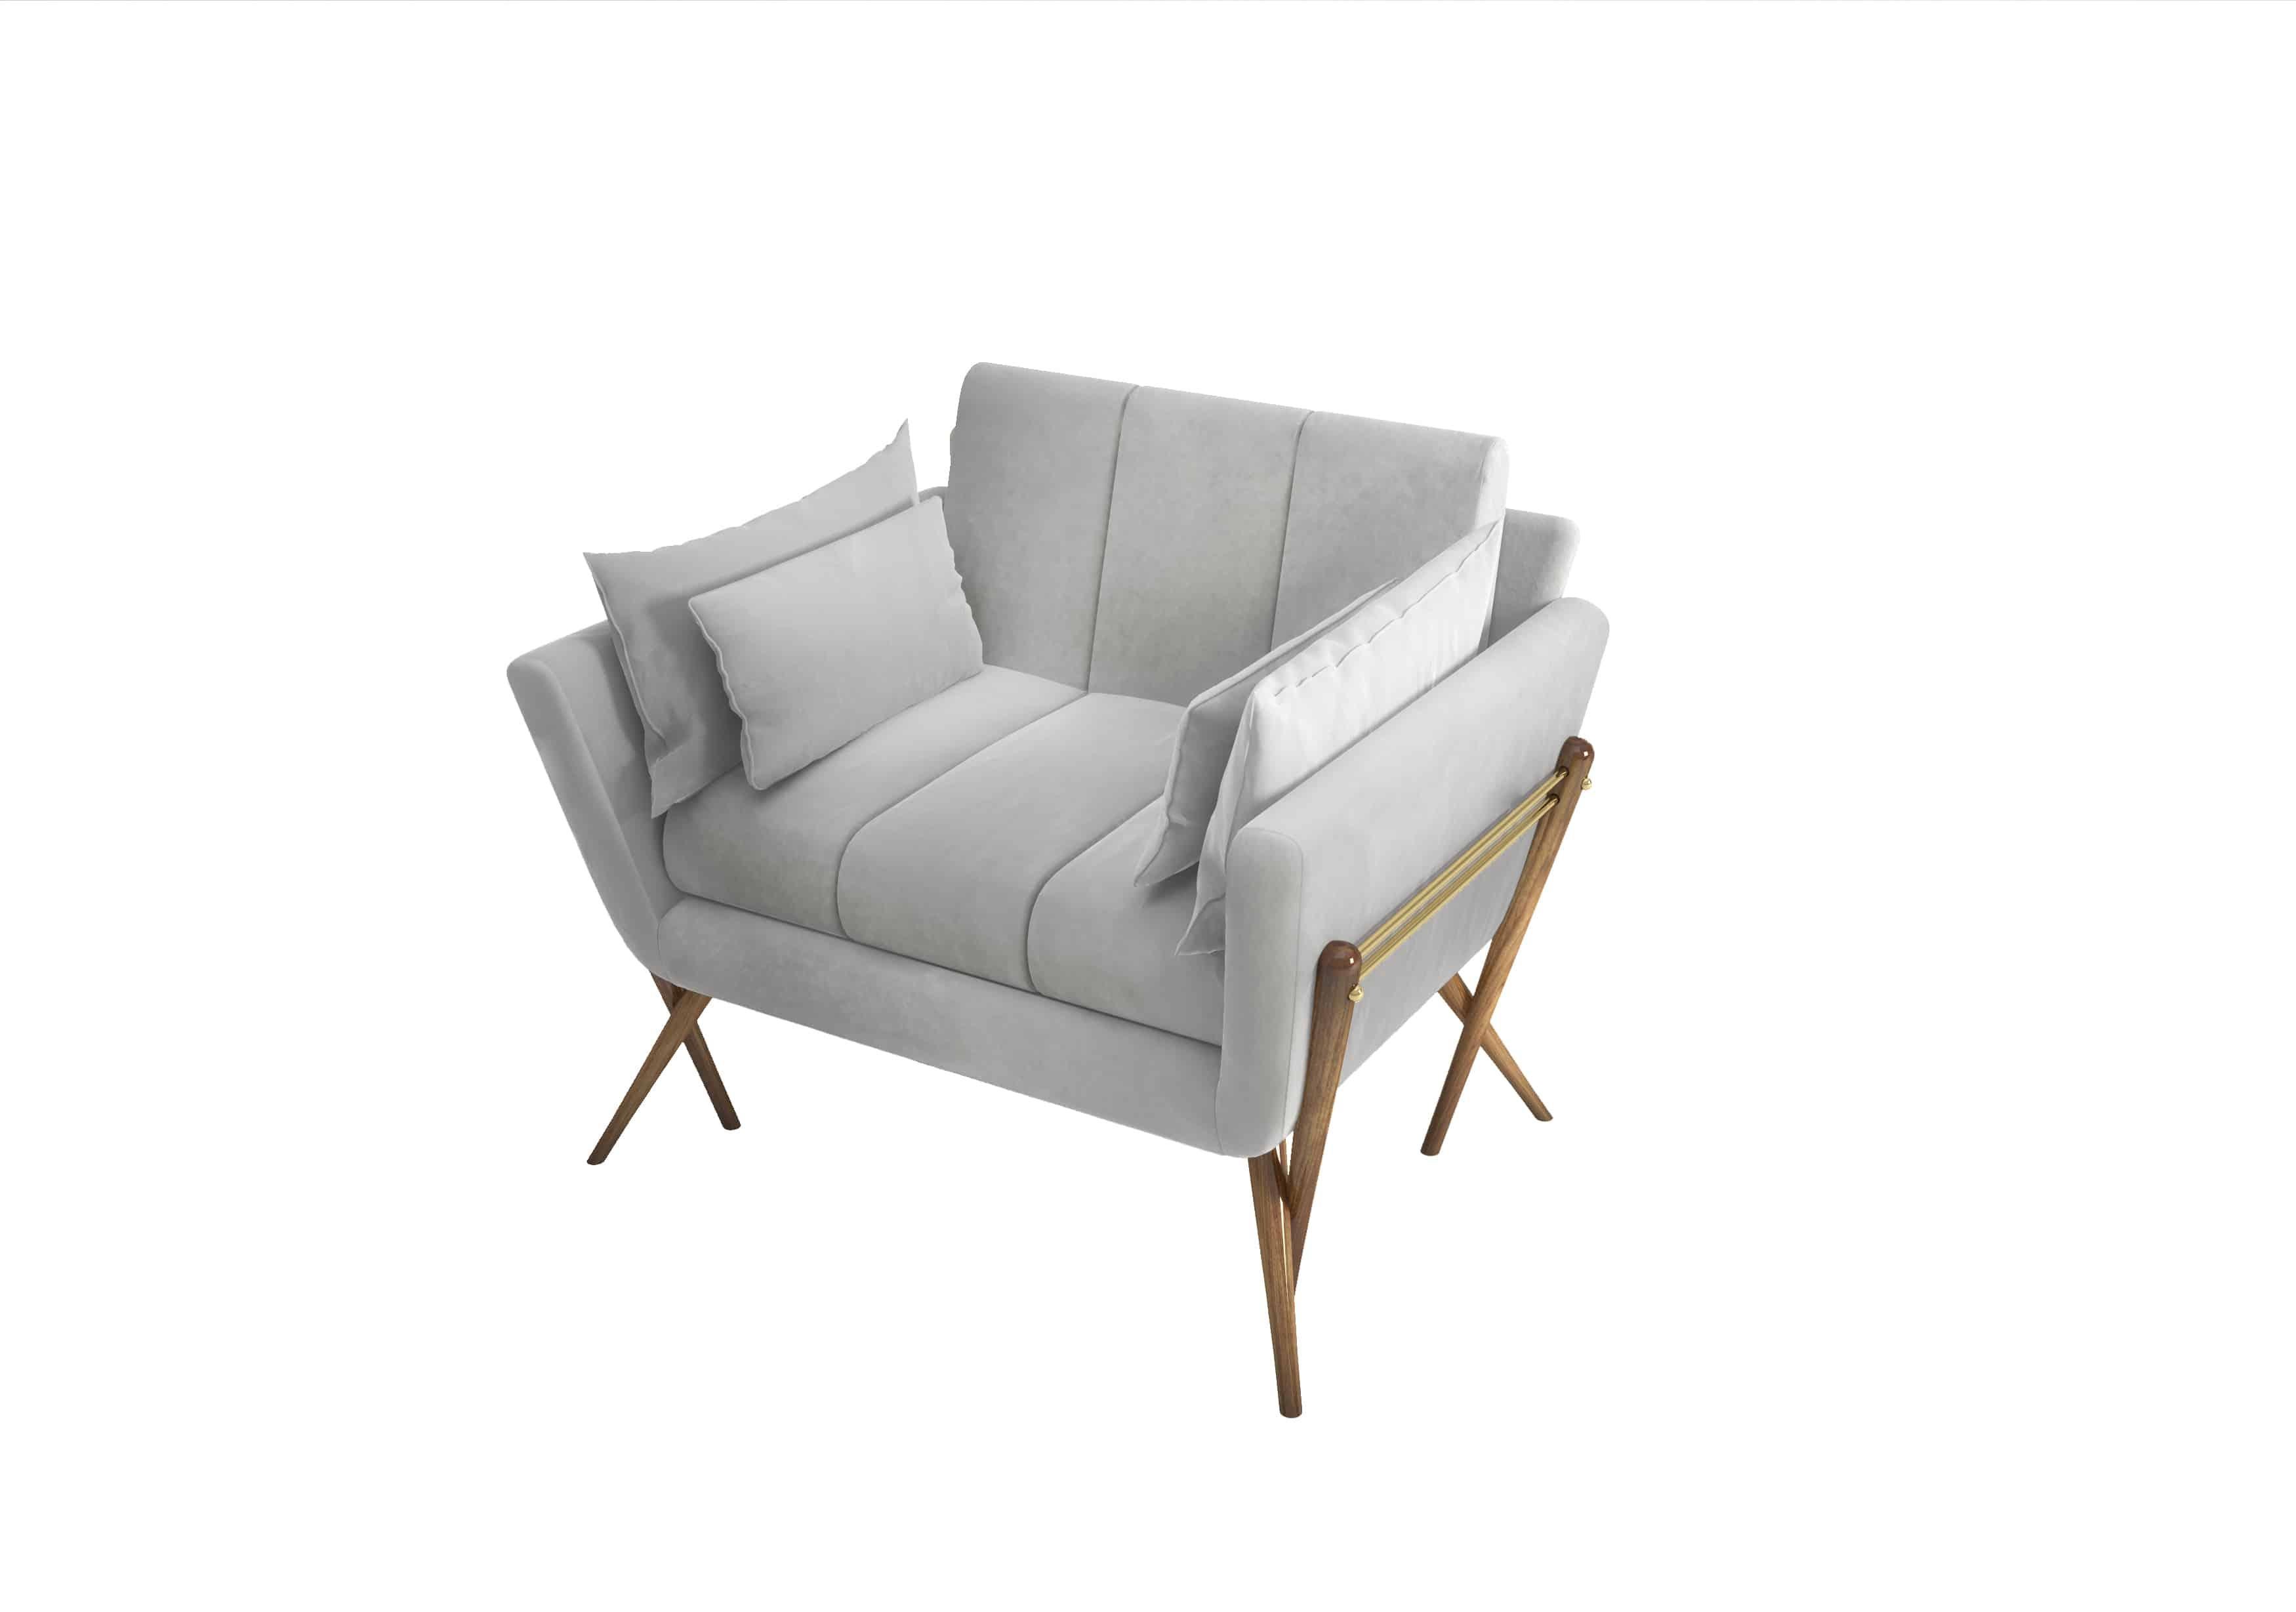 Portuguese Contemporary Armchair Offered In Light Grey Velvet. For Sale